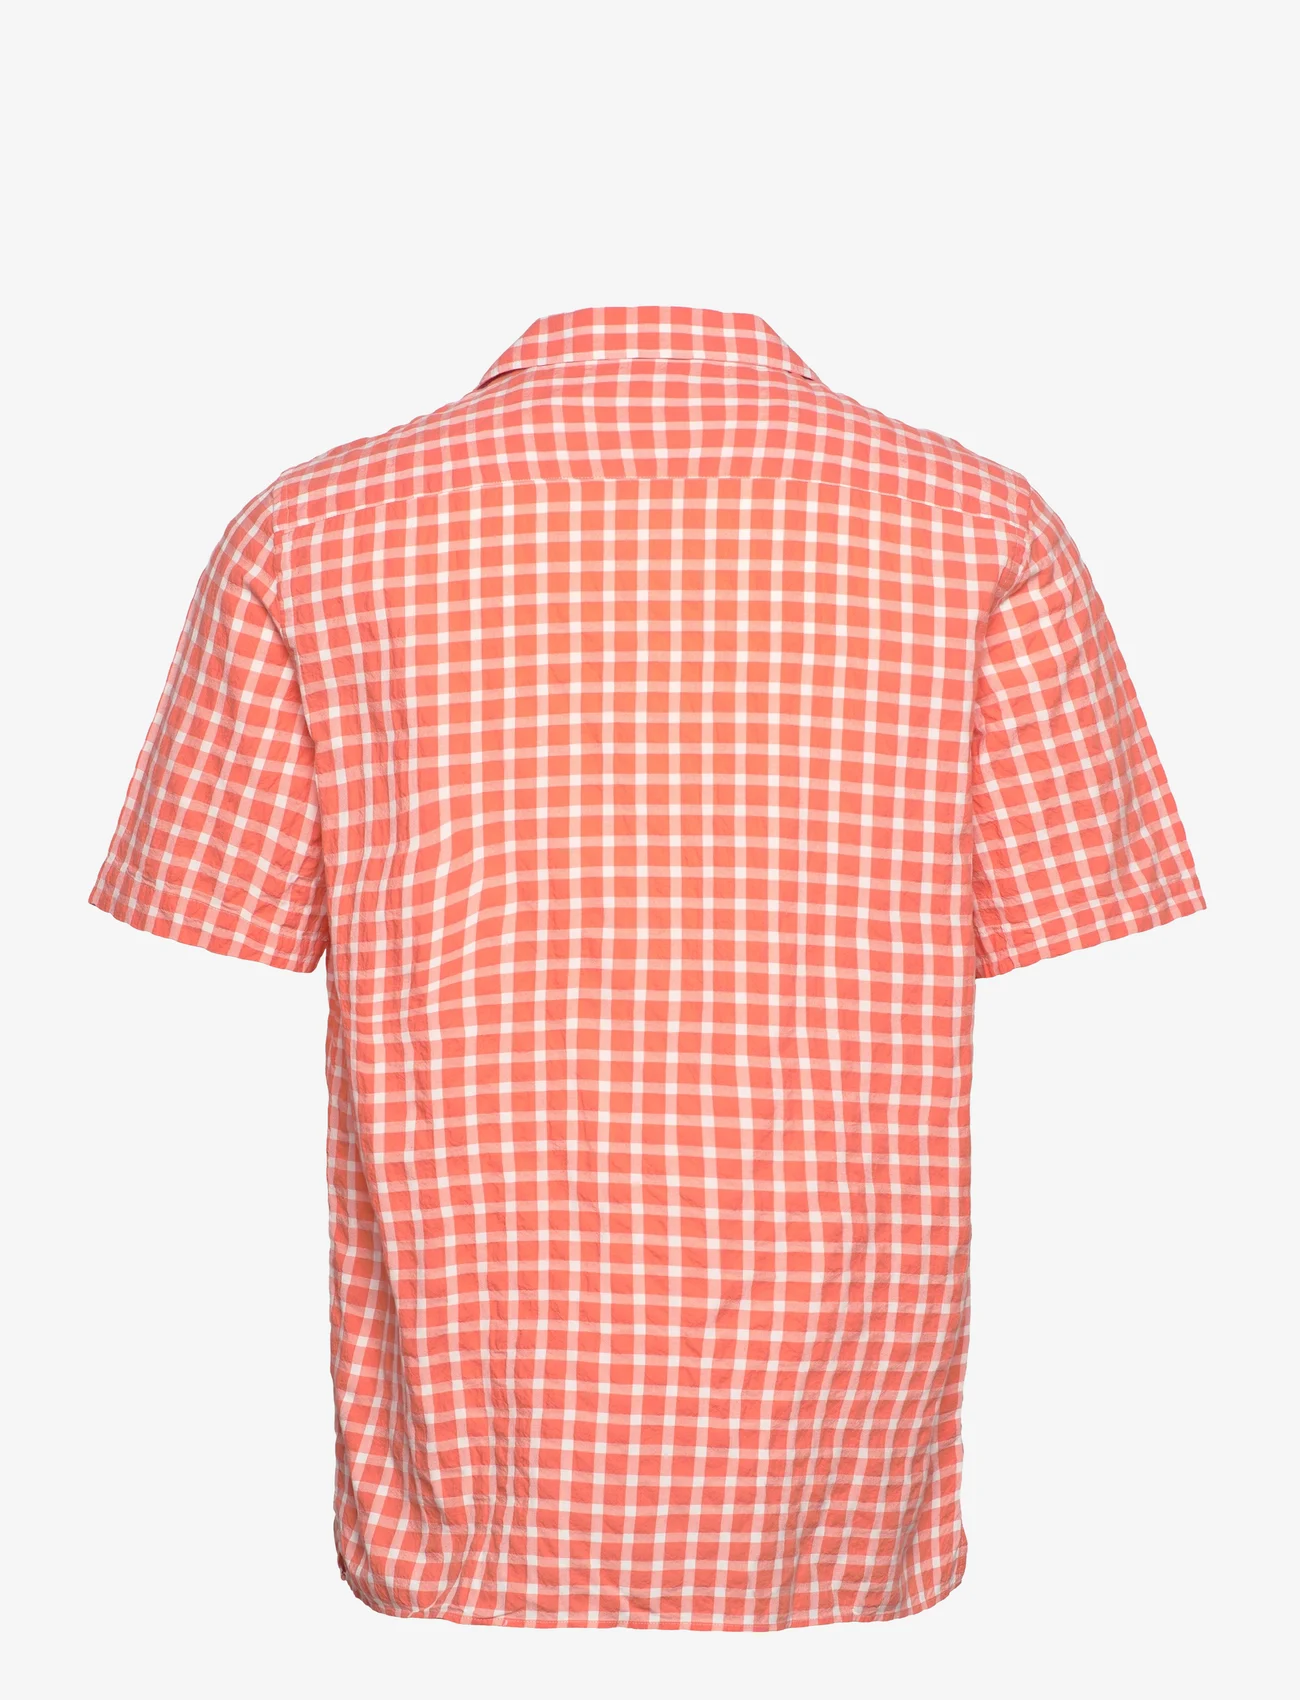 Armor Lux - Checked short-sleeved shirt - ruutupaidat - carreaux coral - 1